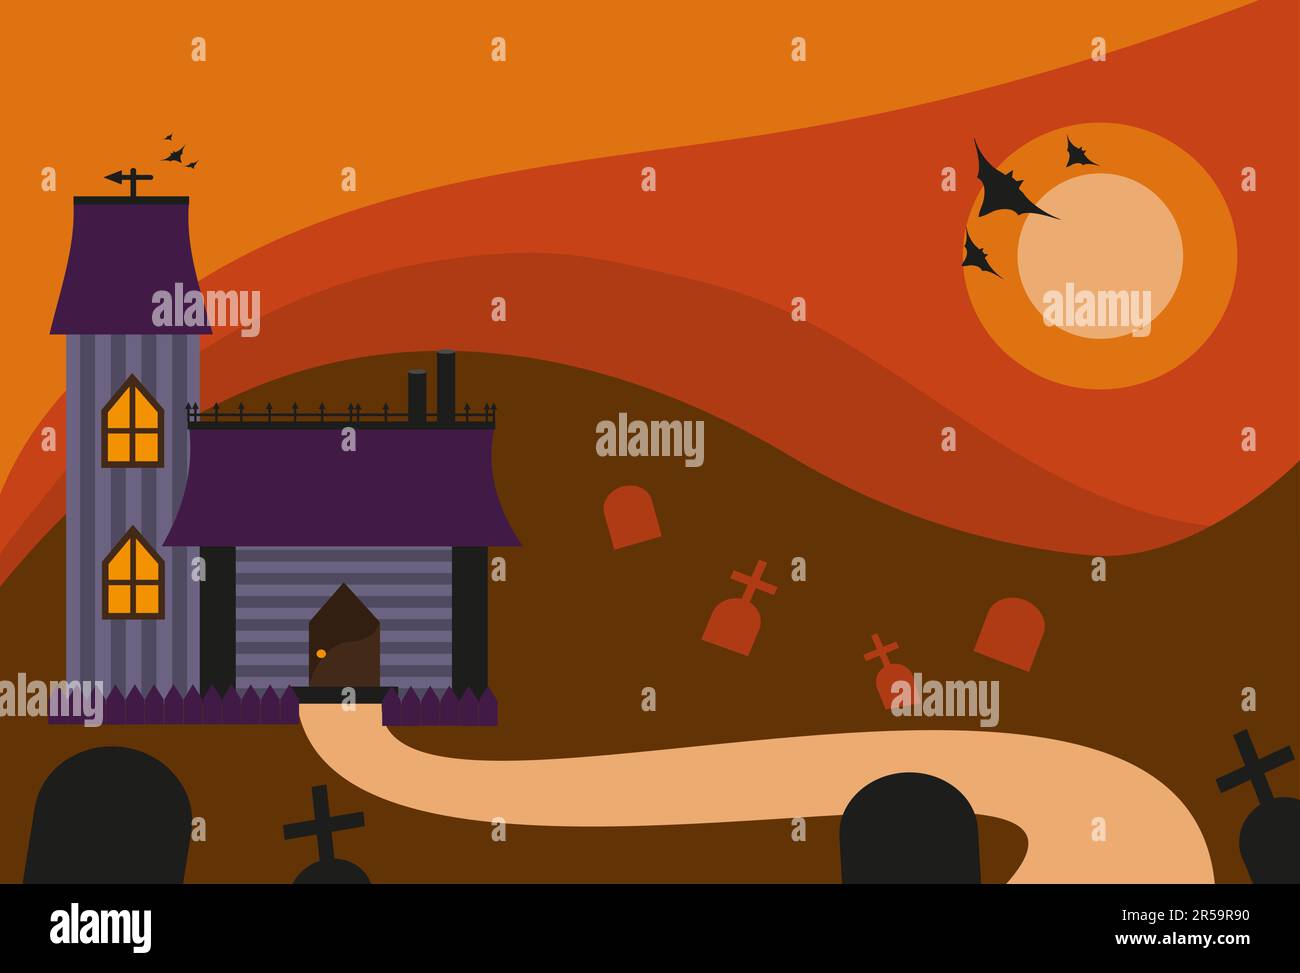 Halloween landscape. House with a road, graves on cemetery, bats in the sky with moon. Orange and red sky. Stock Vector